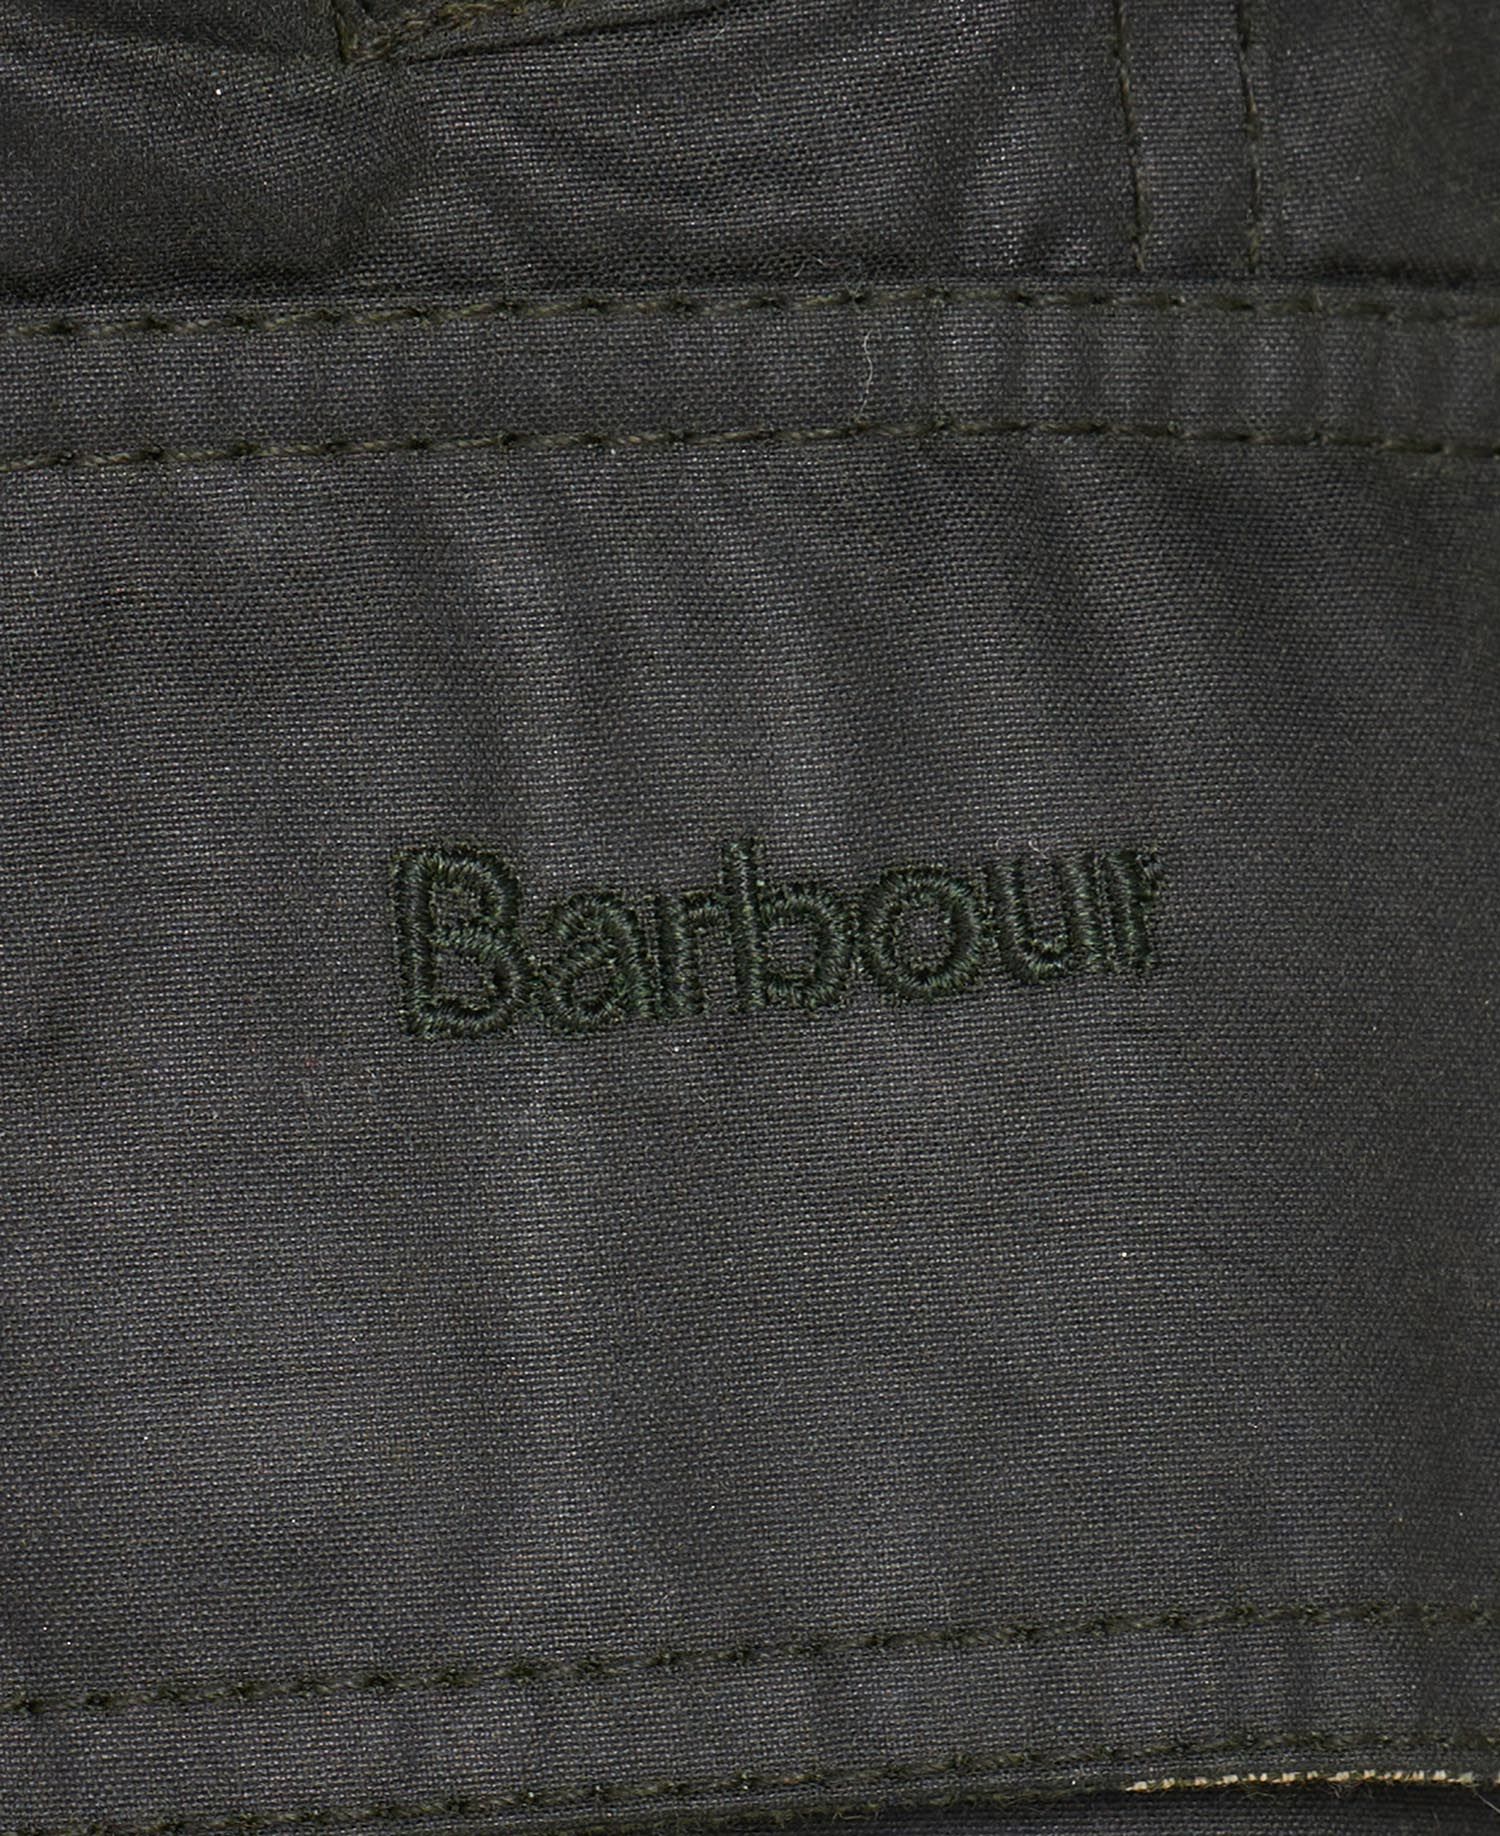 Barbour Beadnell Wax Jacket in Sage | Barbour